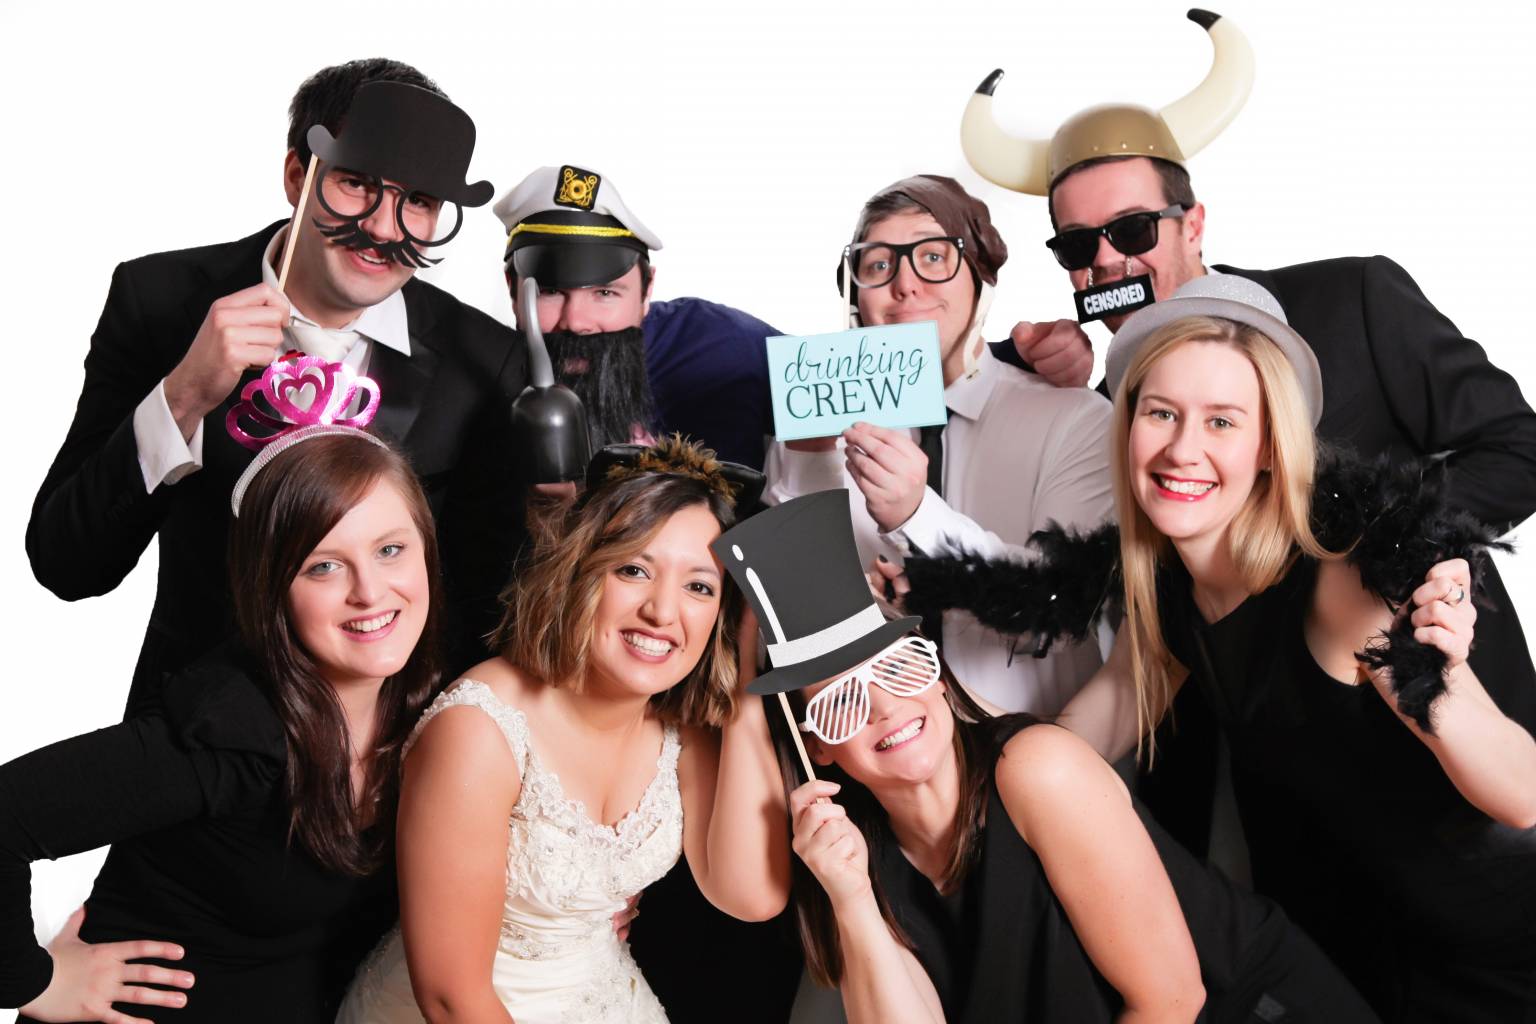 What Are The Main Features Of Photo-Booths For Weddings?